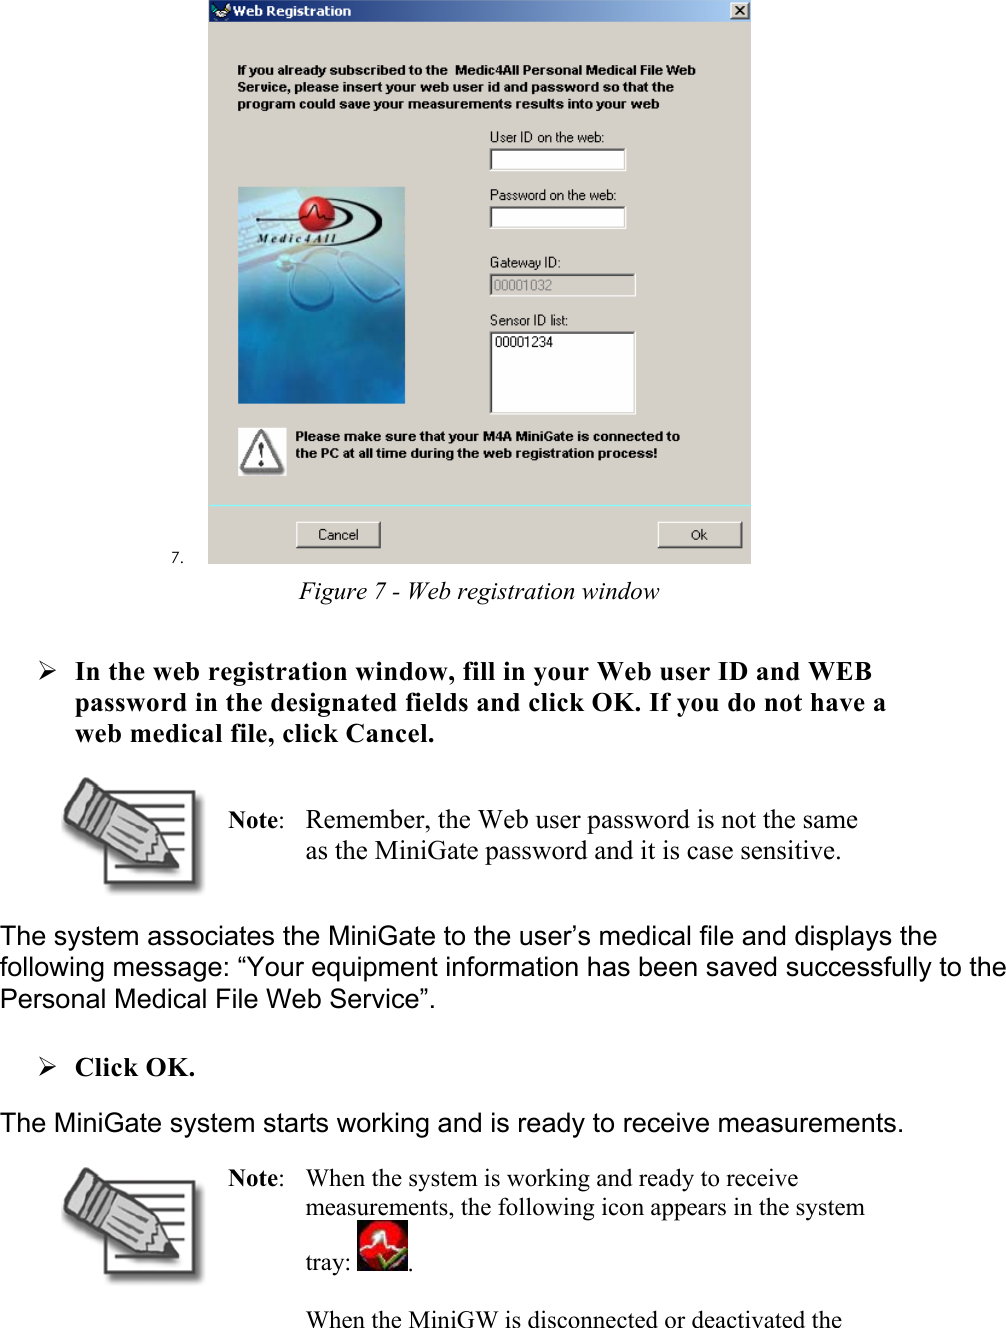 7.  Figure 7 - Web registration window ¾ In the web registration window, fill in your Web user ID and WEB password in the designated fields and click OK. If you do not have a web medical file, click Cancel.  Note:  Remember, the Web user password is not the same as the MiniGate password and it is case sensitive. The system associates the MiniGate to the user’s medical file and displays the following message: “Your equipment information has been saved successfully to the Personal Medical File Web Service”. ¾ Click OK.  The MiniGate system starts working and is ready to receive measurements.   Note:  When the system is working and ready to receive measurements, the following icon appears in the system tray:  .   When the MiniGW is disconnected or deactivated the 